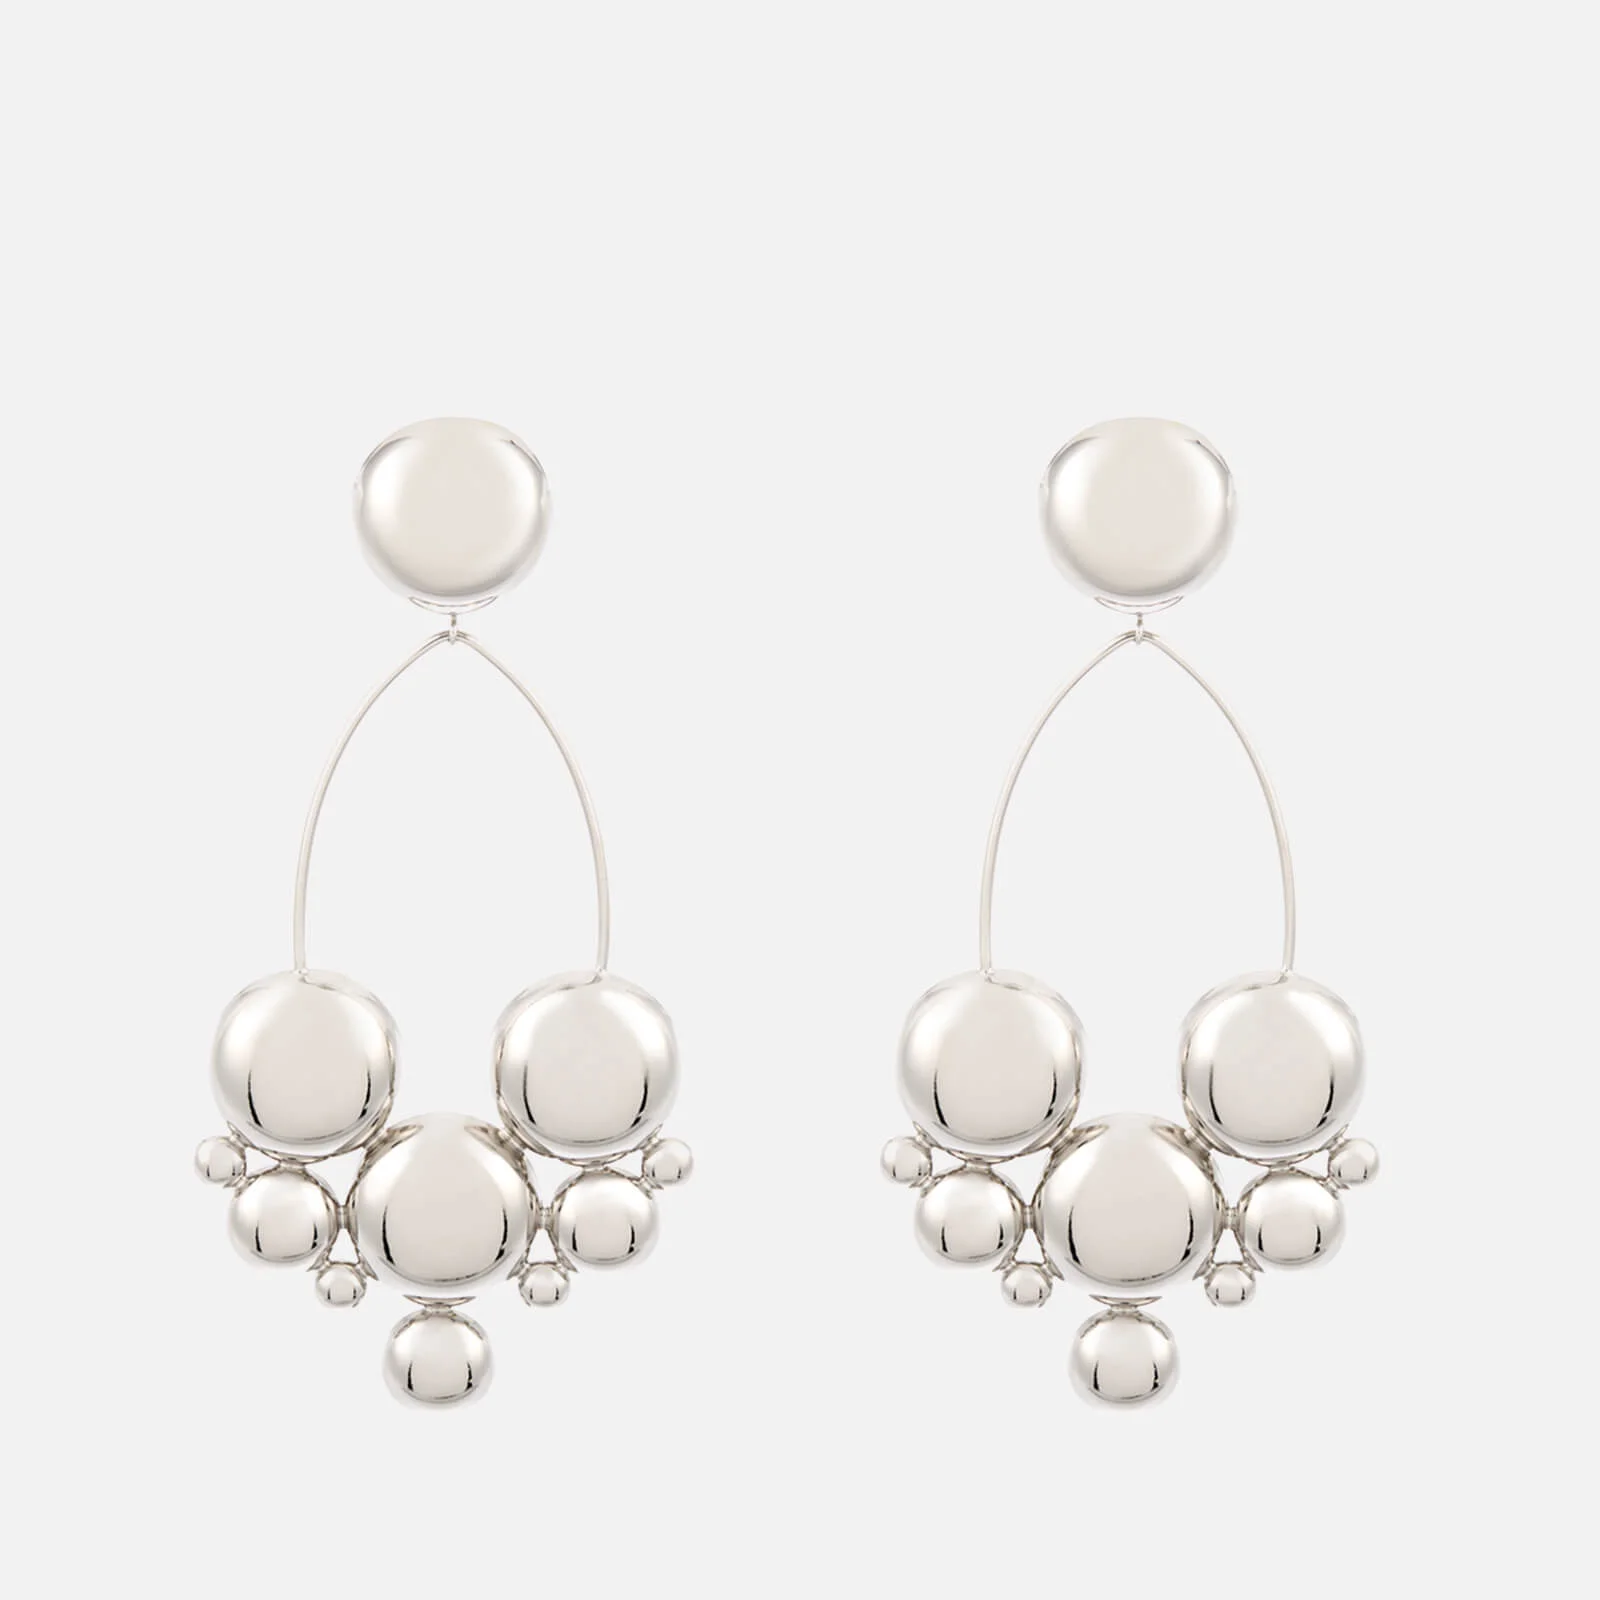 Isabel Marant Women's Circle Cluster Boo Earrings - Silver Image 1